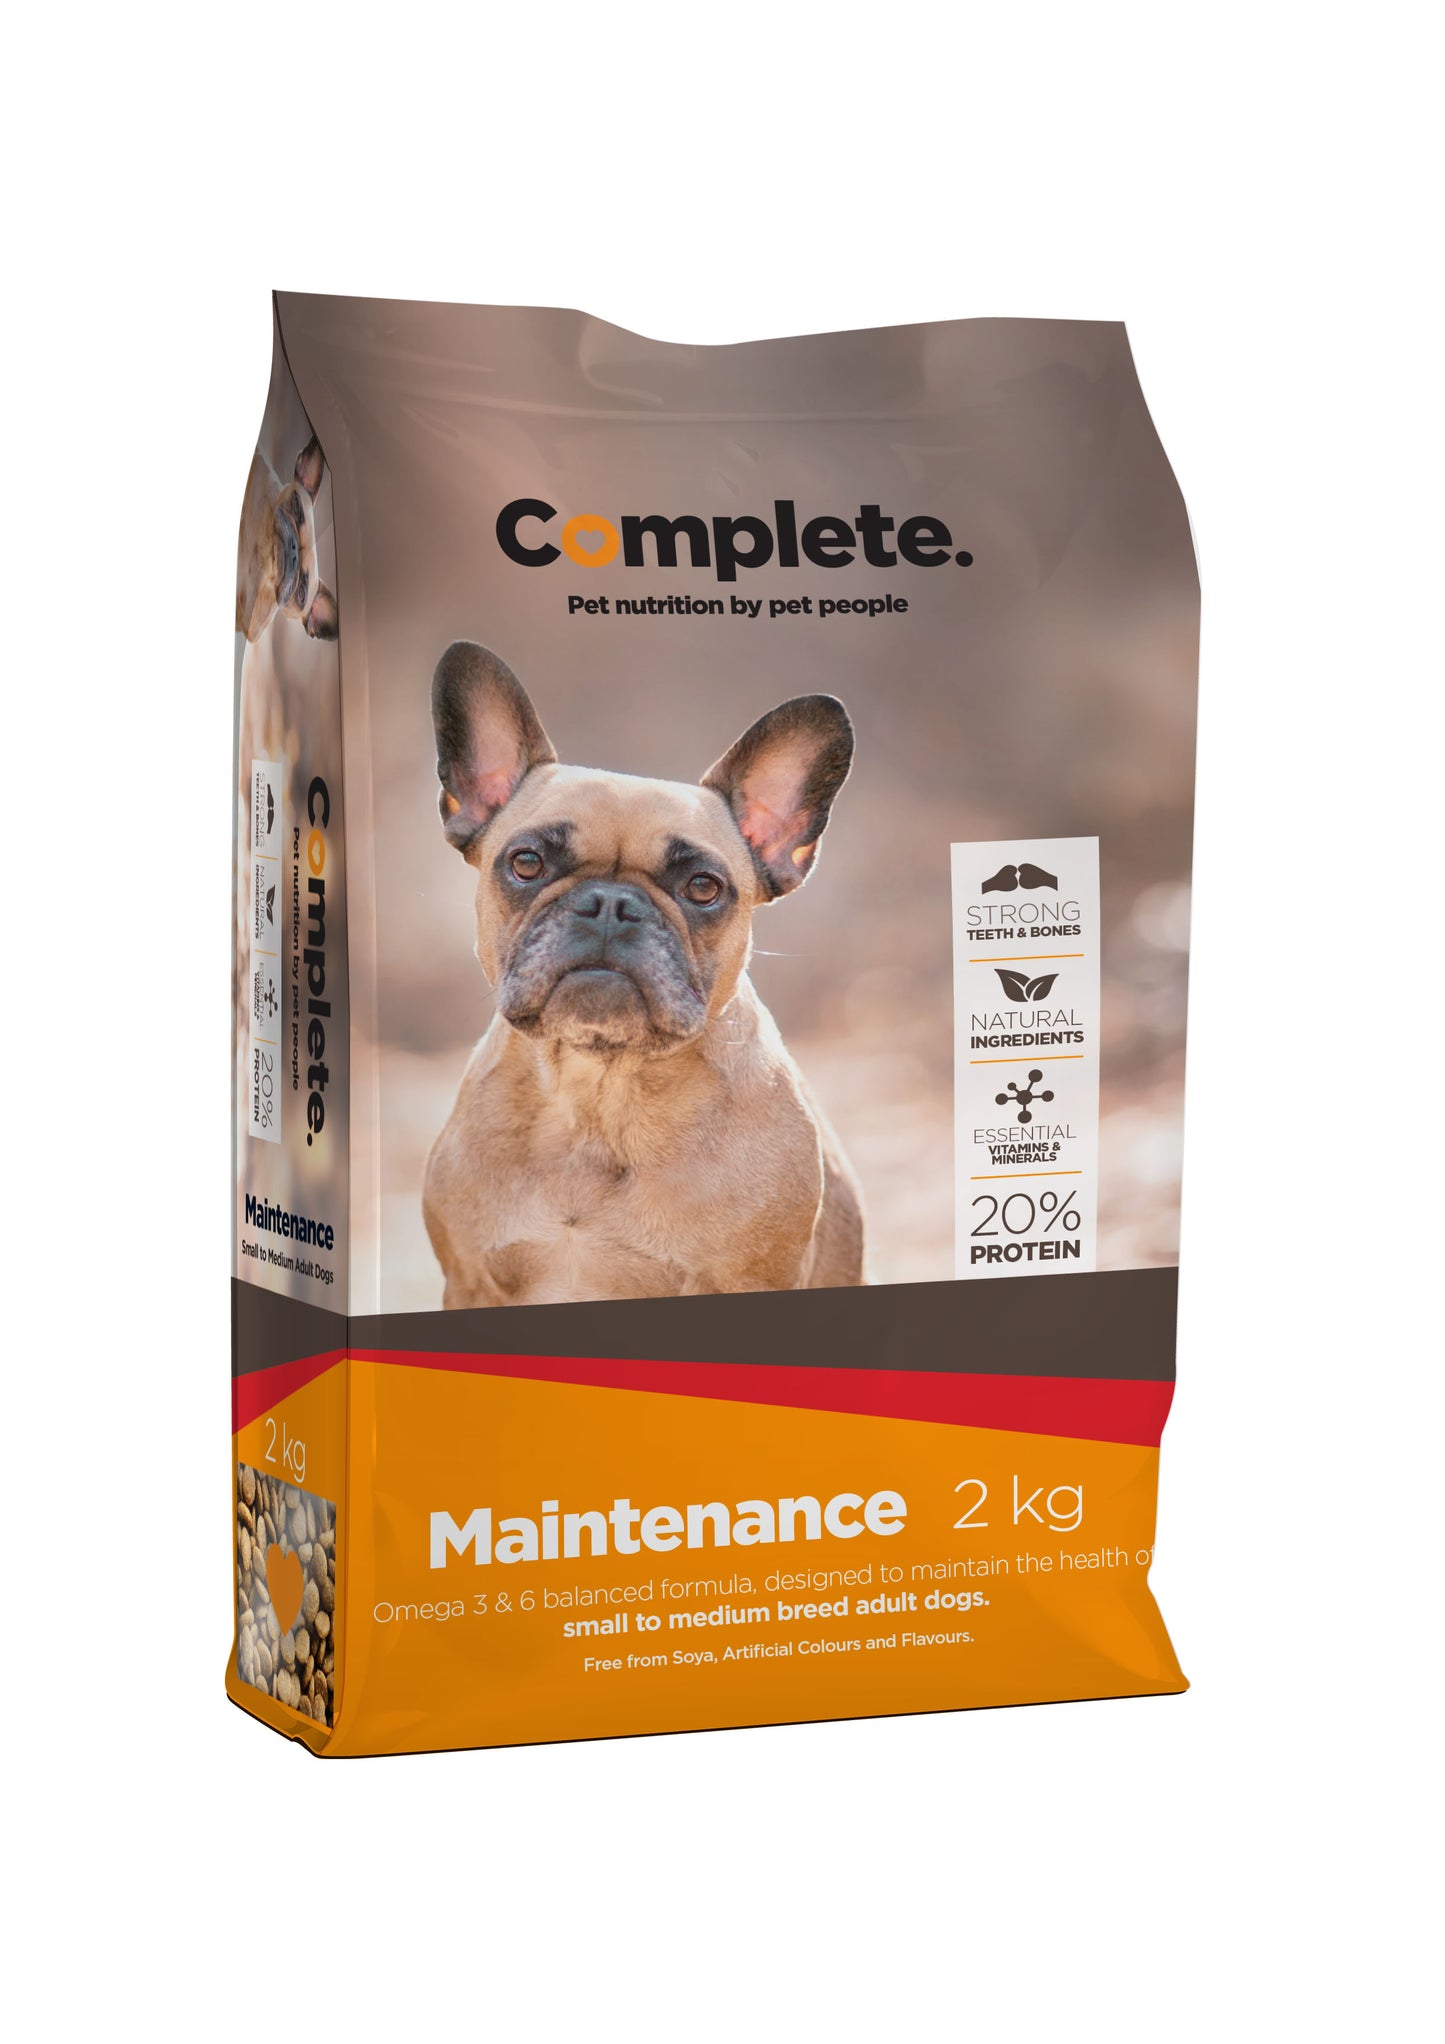 Maintenance 2kg Complete Pet Food For Small to Medium breed adult dogs from Pets Planet - South Africa’s Best Online Pet Store for premium pet products, best pet store near me, Dog food, pet food, dog wet food, dog bed, dog beds, washable dog bed, takealot dog bed, Complete Pet Nutrition, Complete pet nutrition dog food, hills dog food, optimizor dog food, royal canin dog food, jock dog food, bobtail dog food, canine cuisine, acana dog food, best dog food, dog food near me, best dog food brands